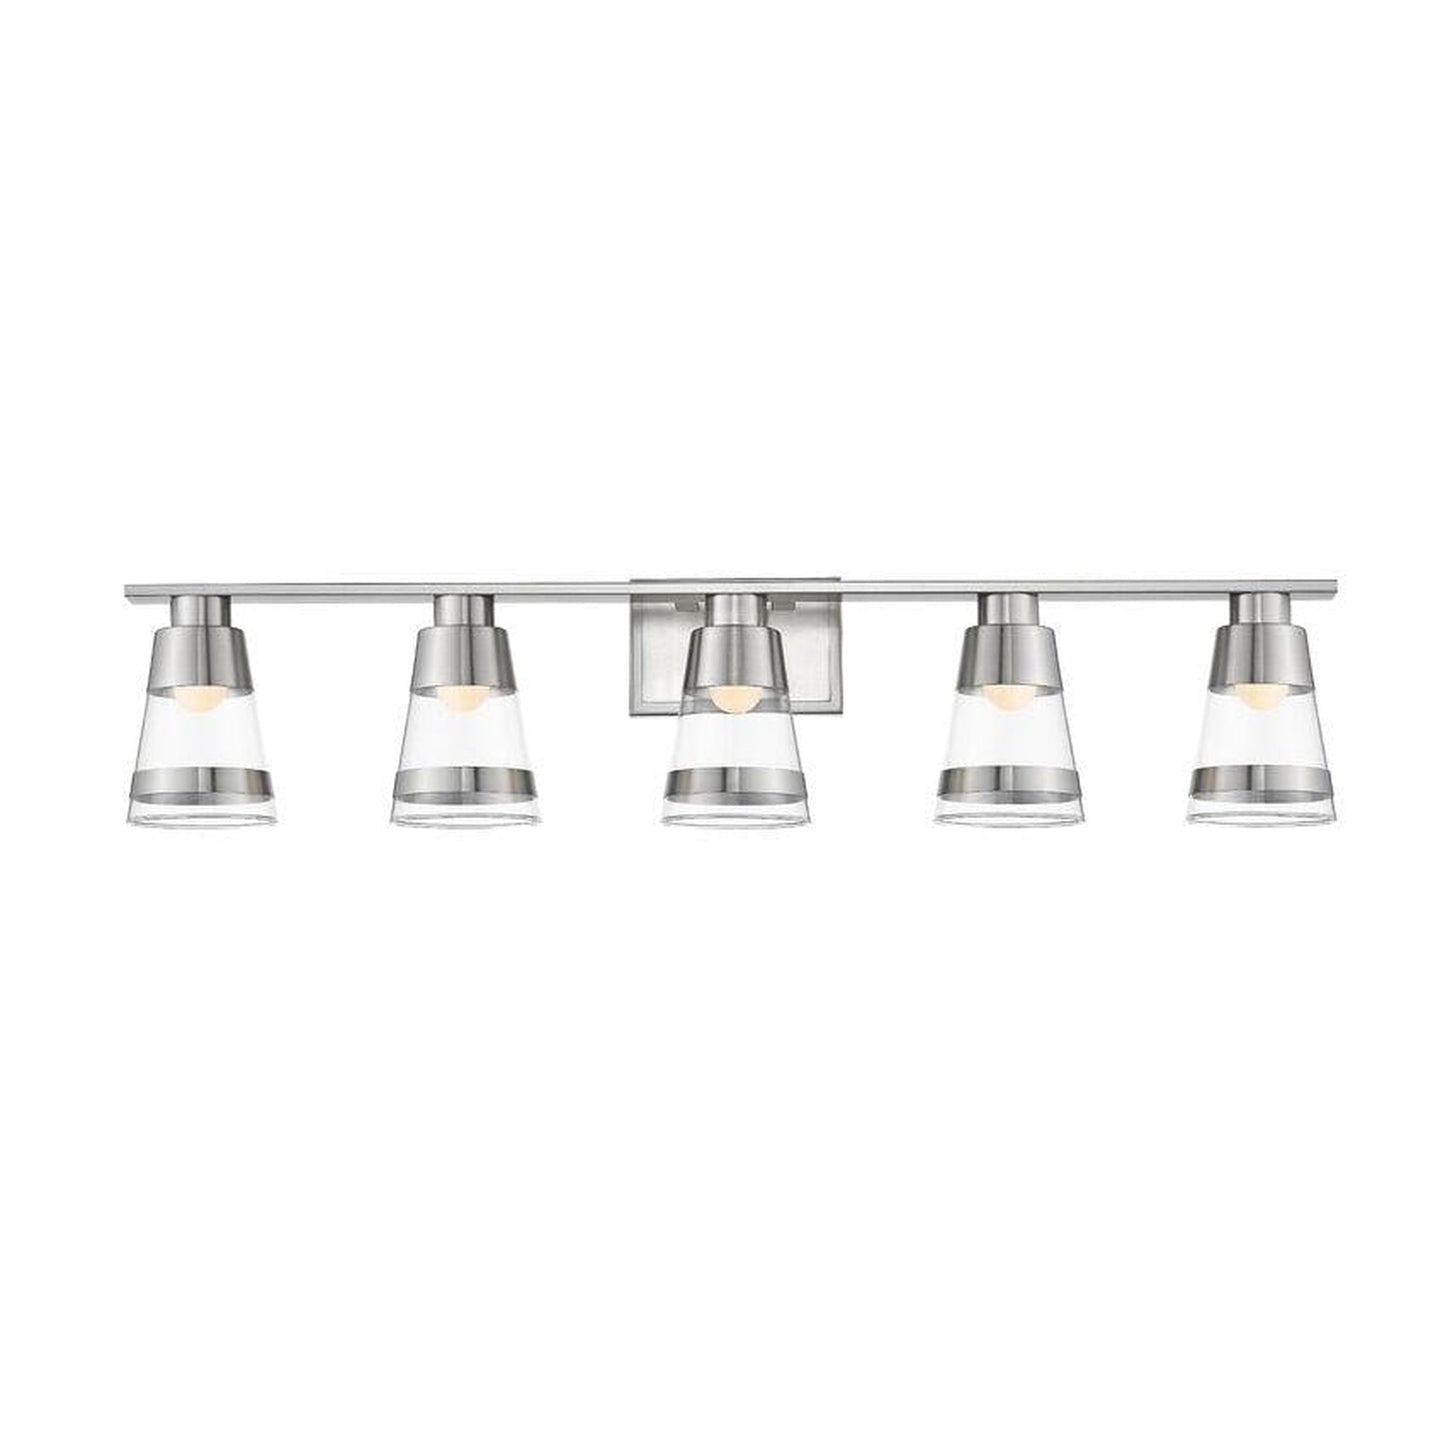 Z-Lite Ethos 40" 5-Light LED Brushed Nickel Vanity Light With Clear Glass Shade